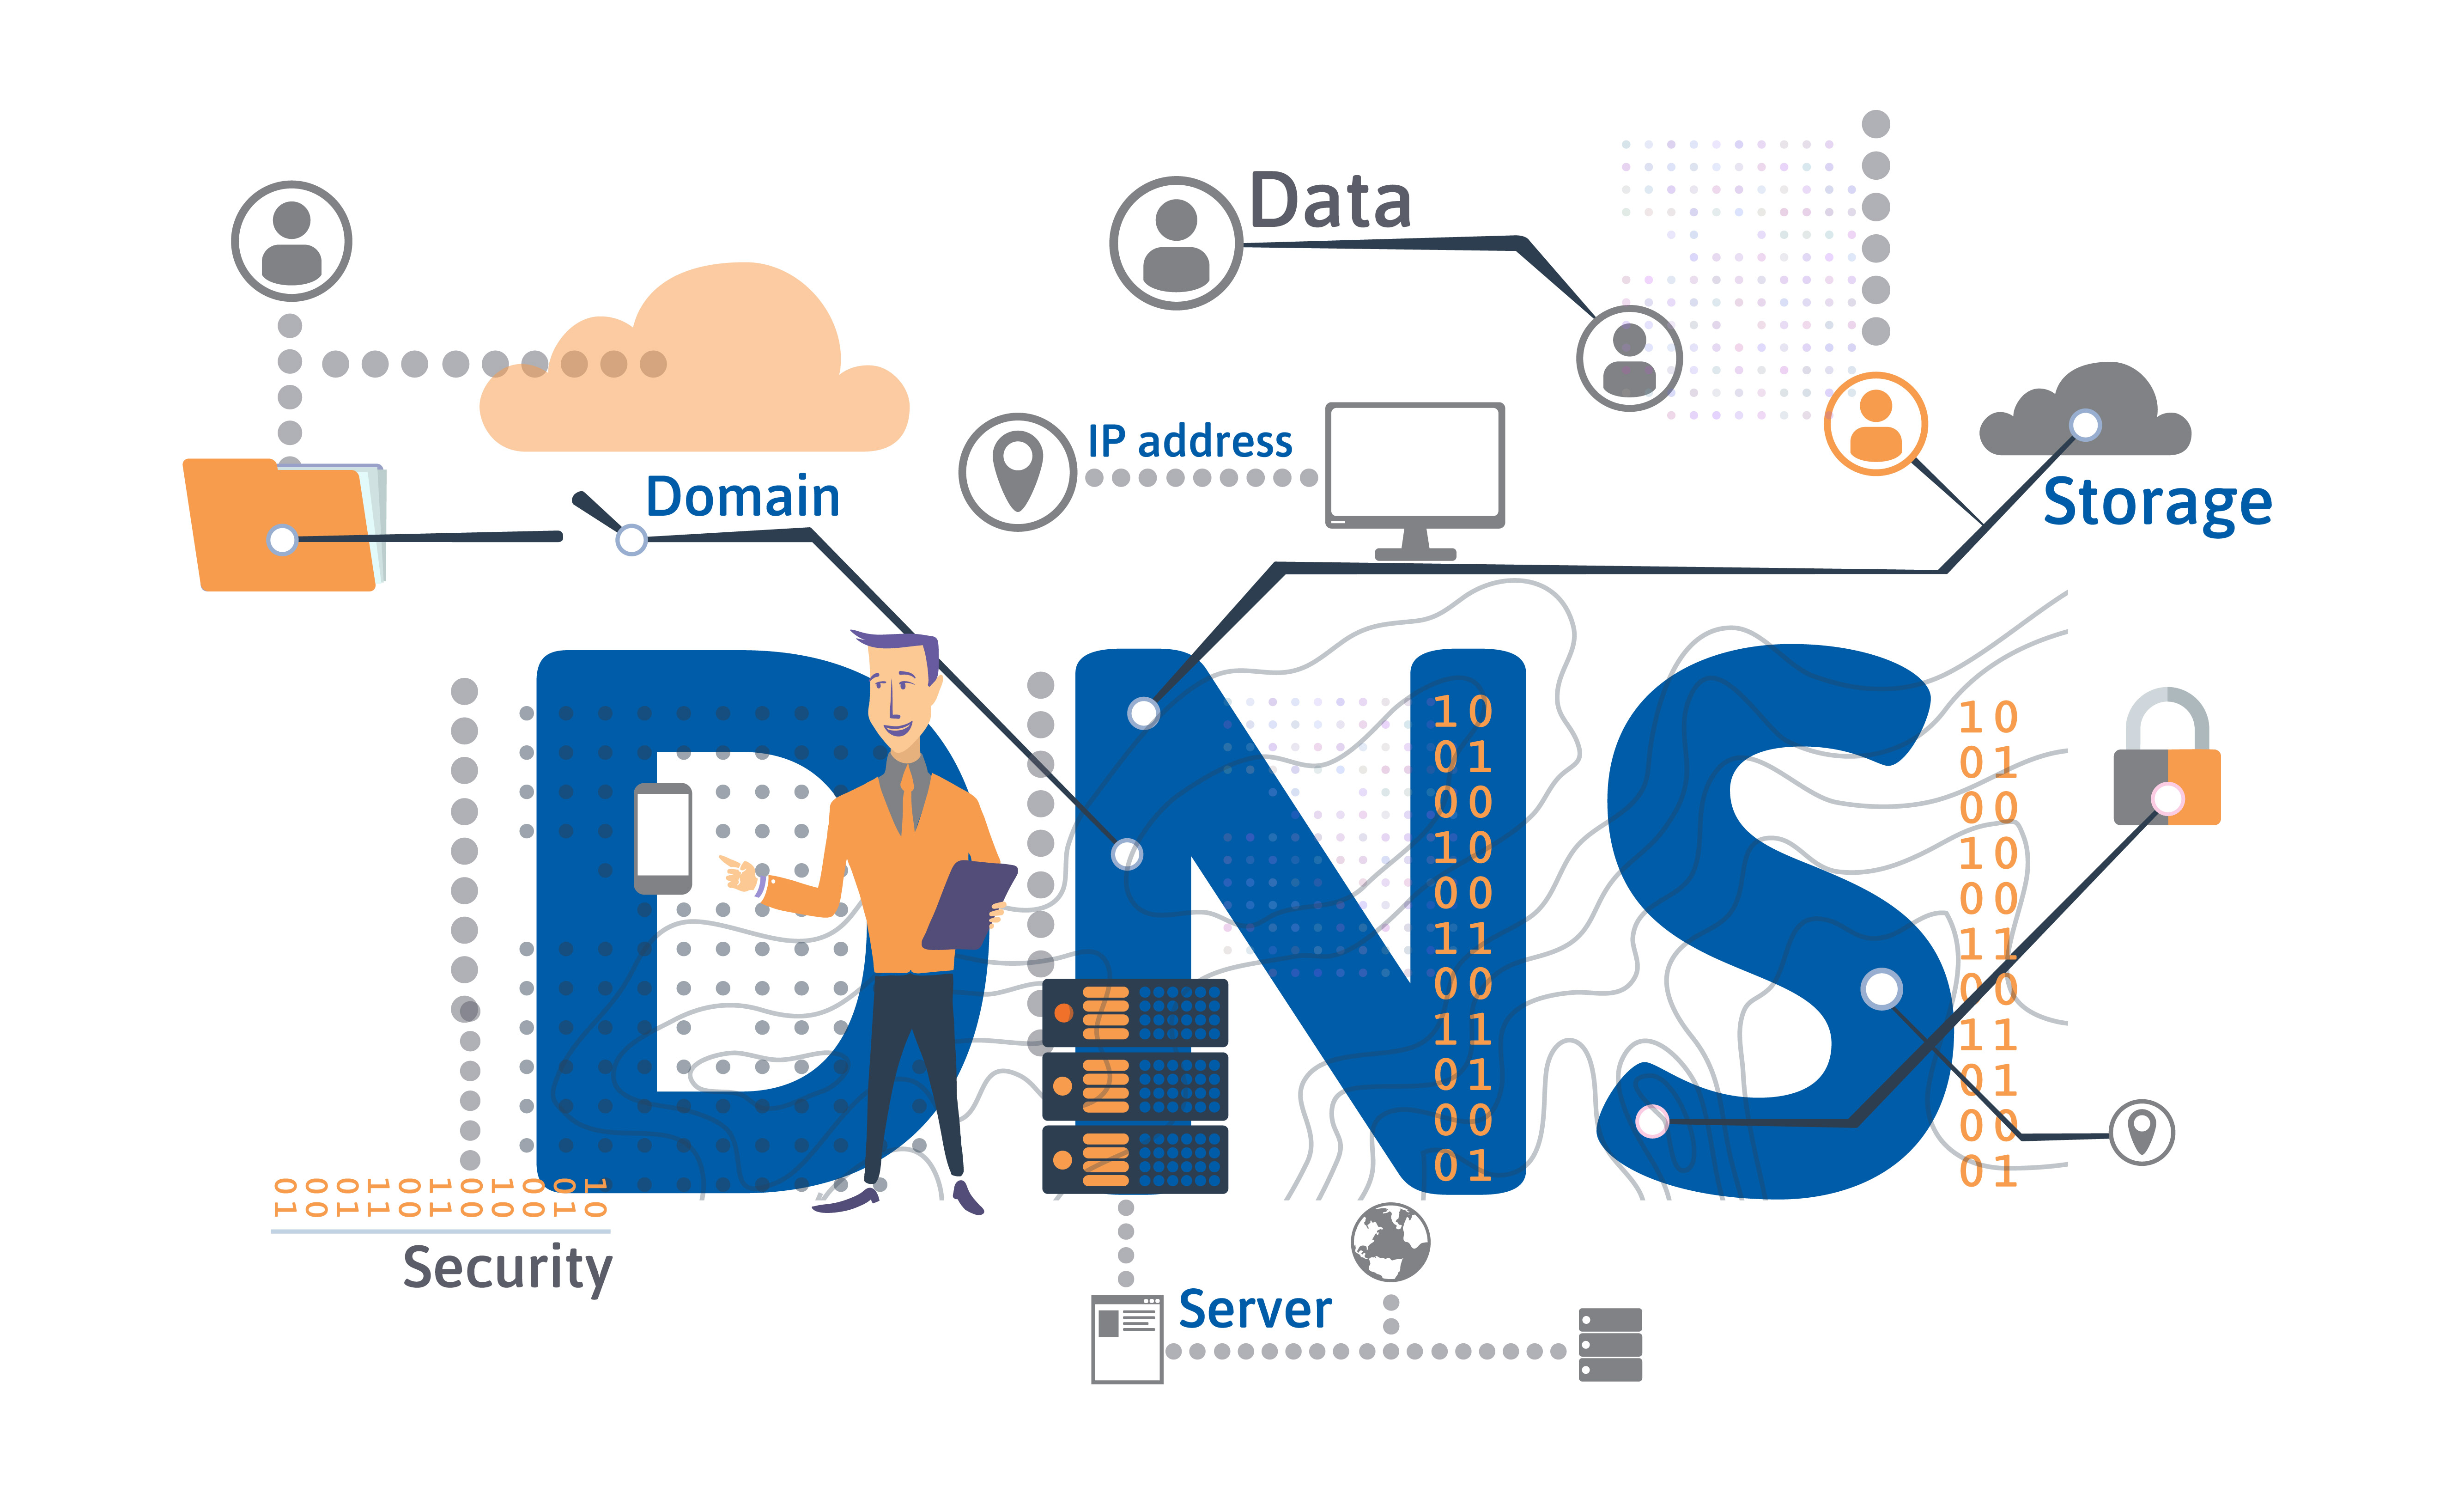 A day after graduate: Mengevaluasi DNS Server